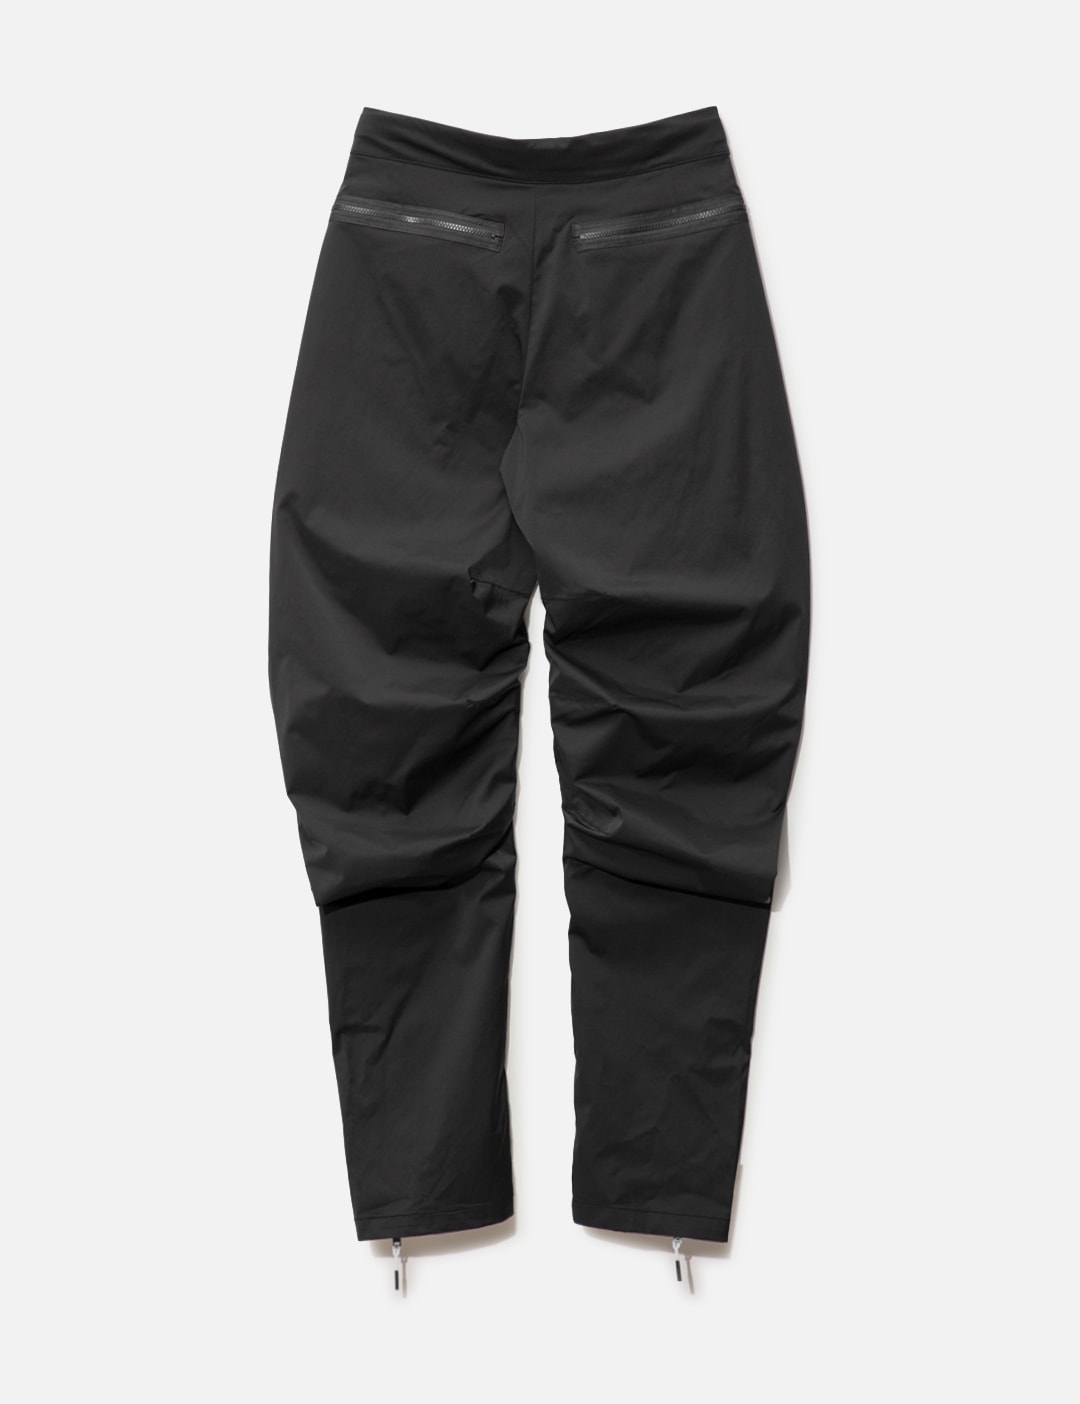 99%IS- - D-RING PANTS | HBX - Globally Curated Fashion and Lifestyle by ...